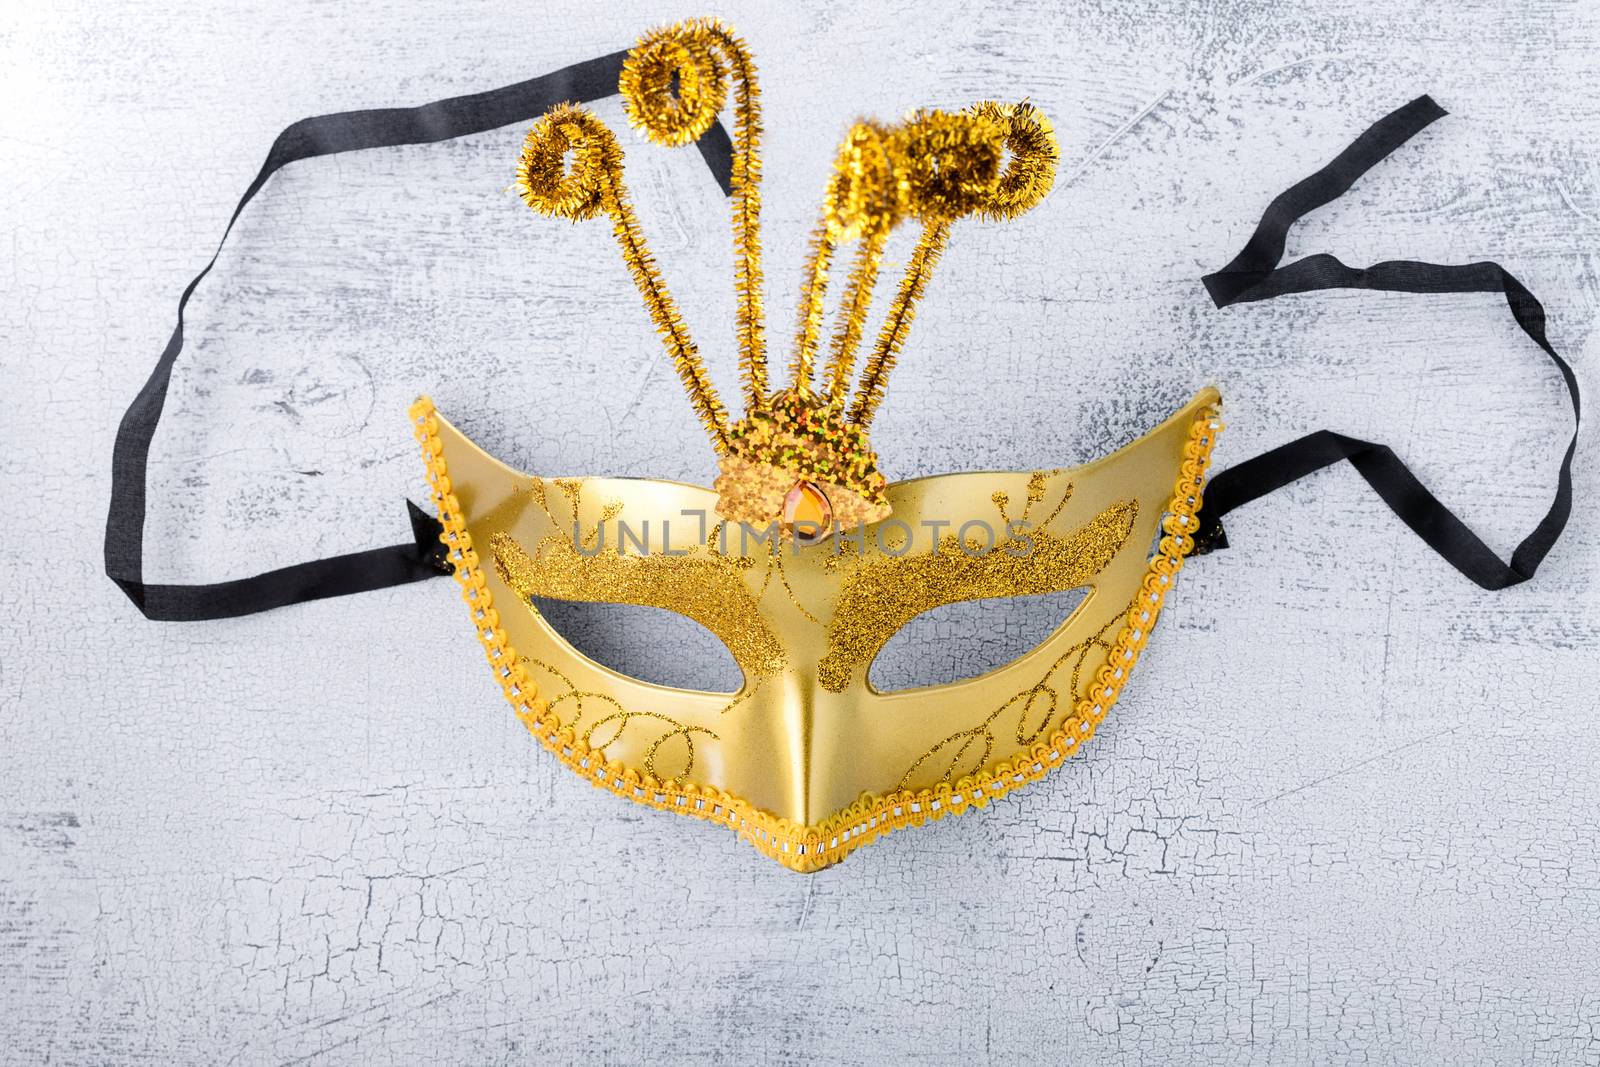 Gold carnival mask on a white background